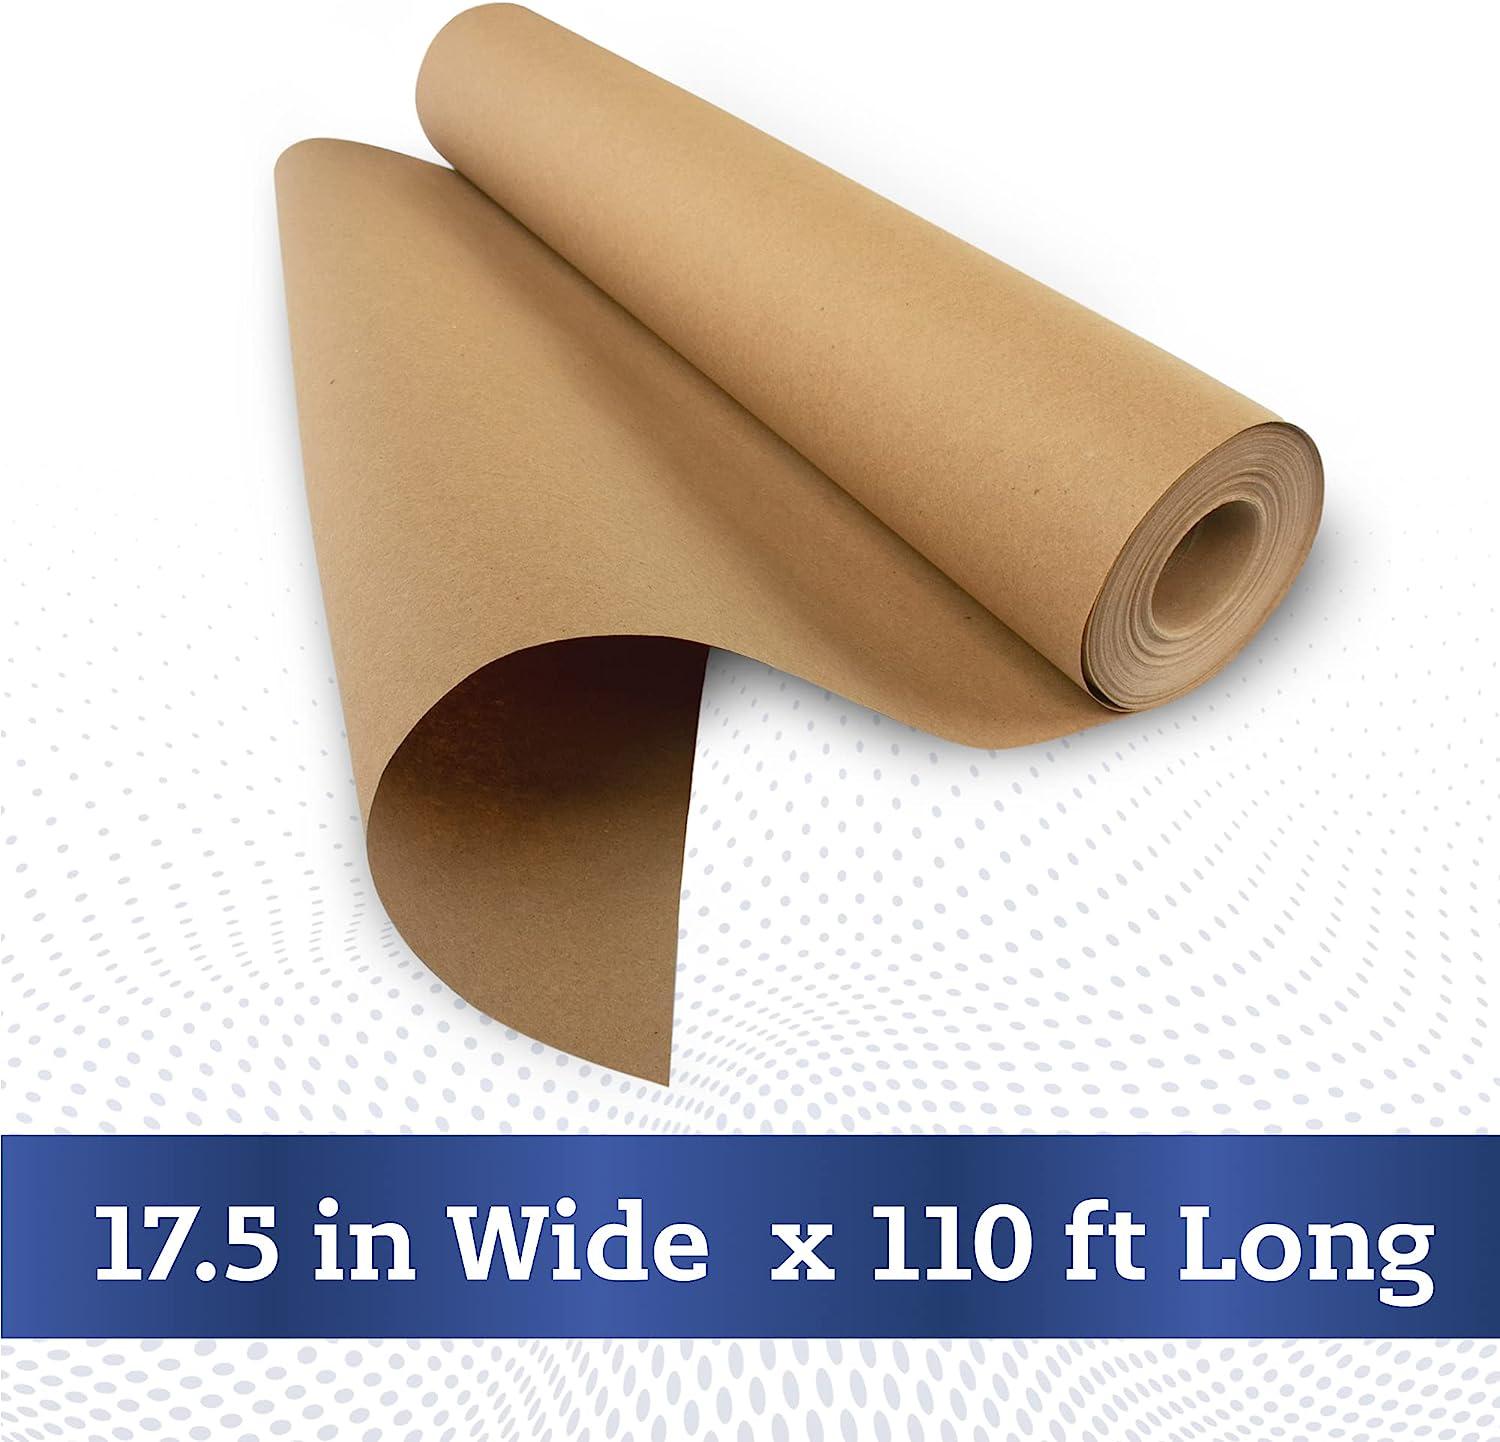 Phinus Brown Paper Roll 15×400, Brown Wrapping Paper, Wrapping Paper,  Craft Paper, Packing Paper